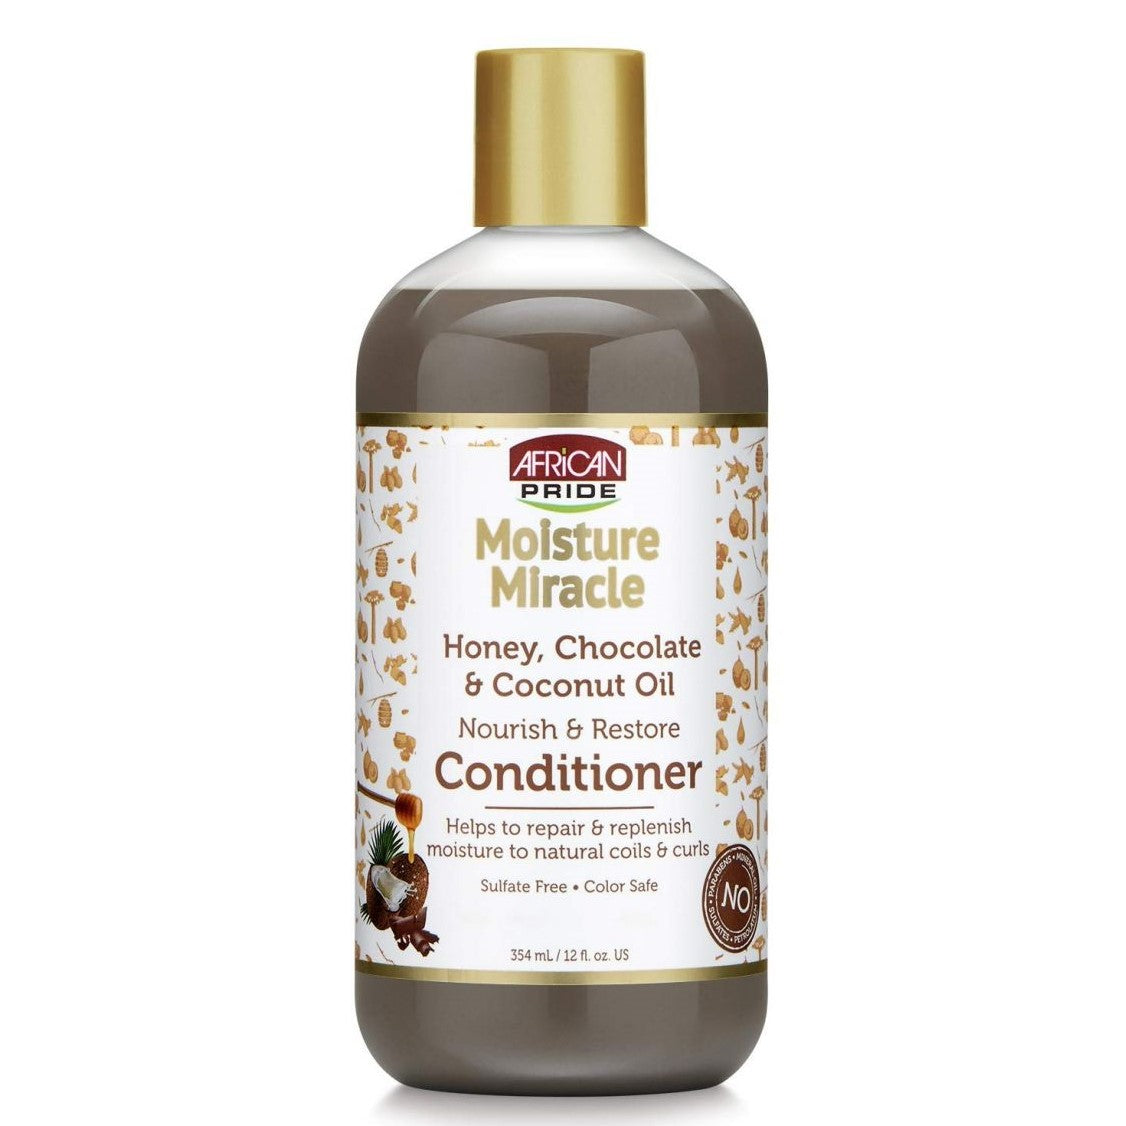 African Pride Moisture Miracle Honey, Chocoloate & Coconut Oil Conditioner 354 ml